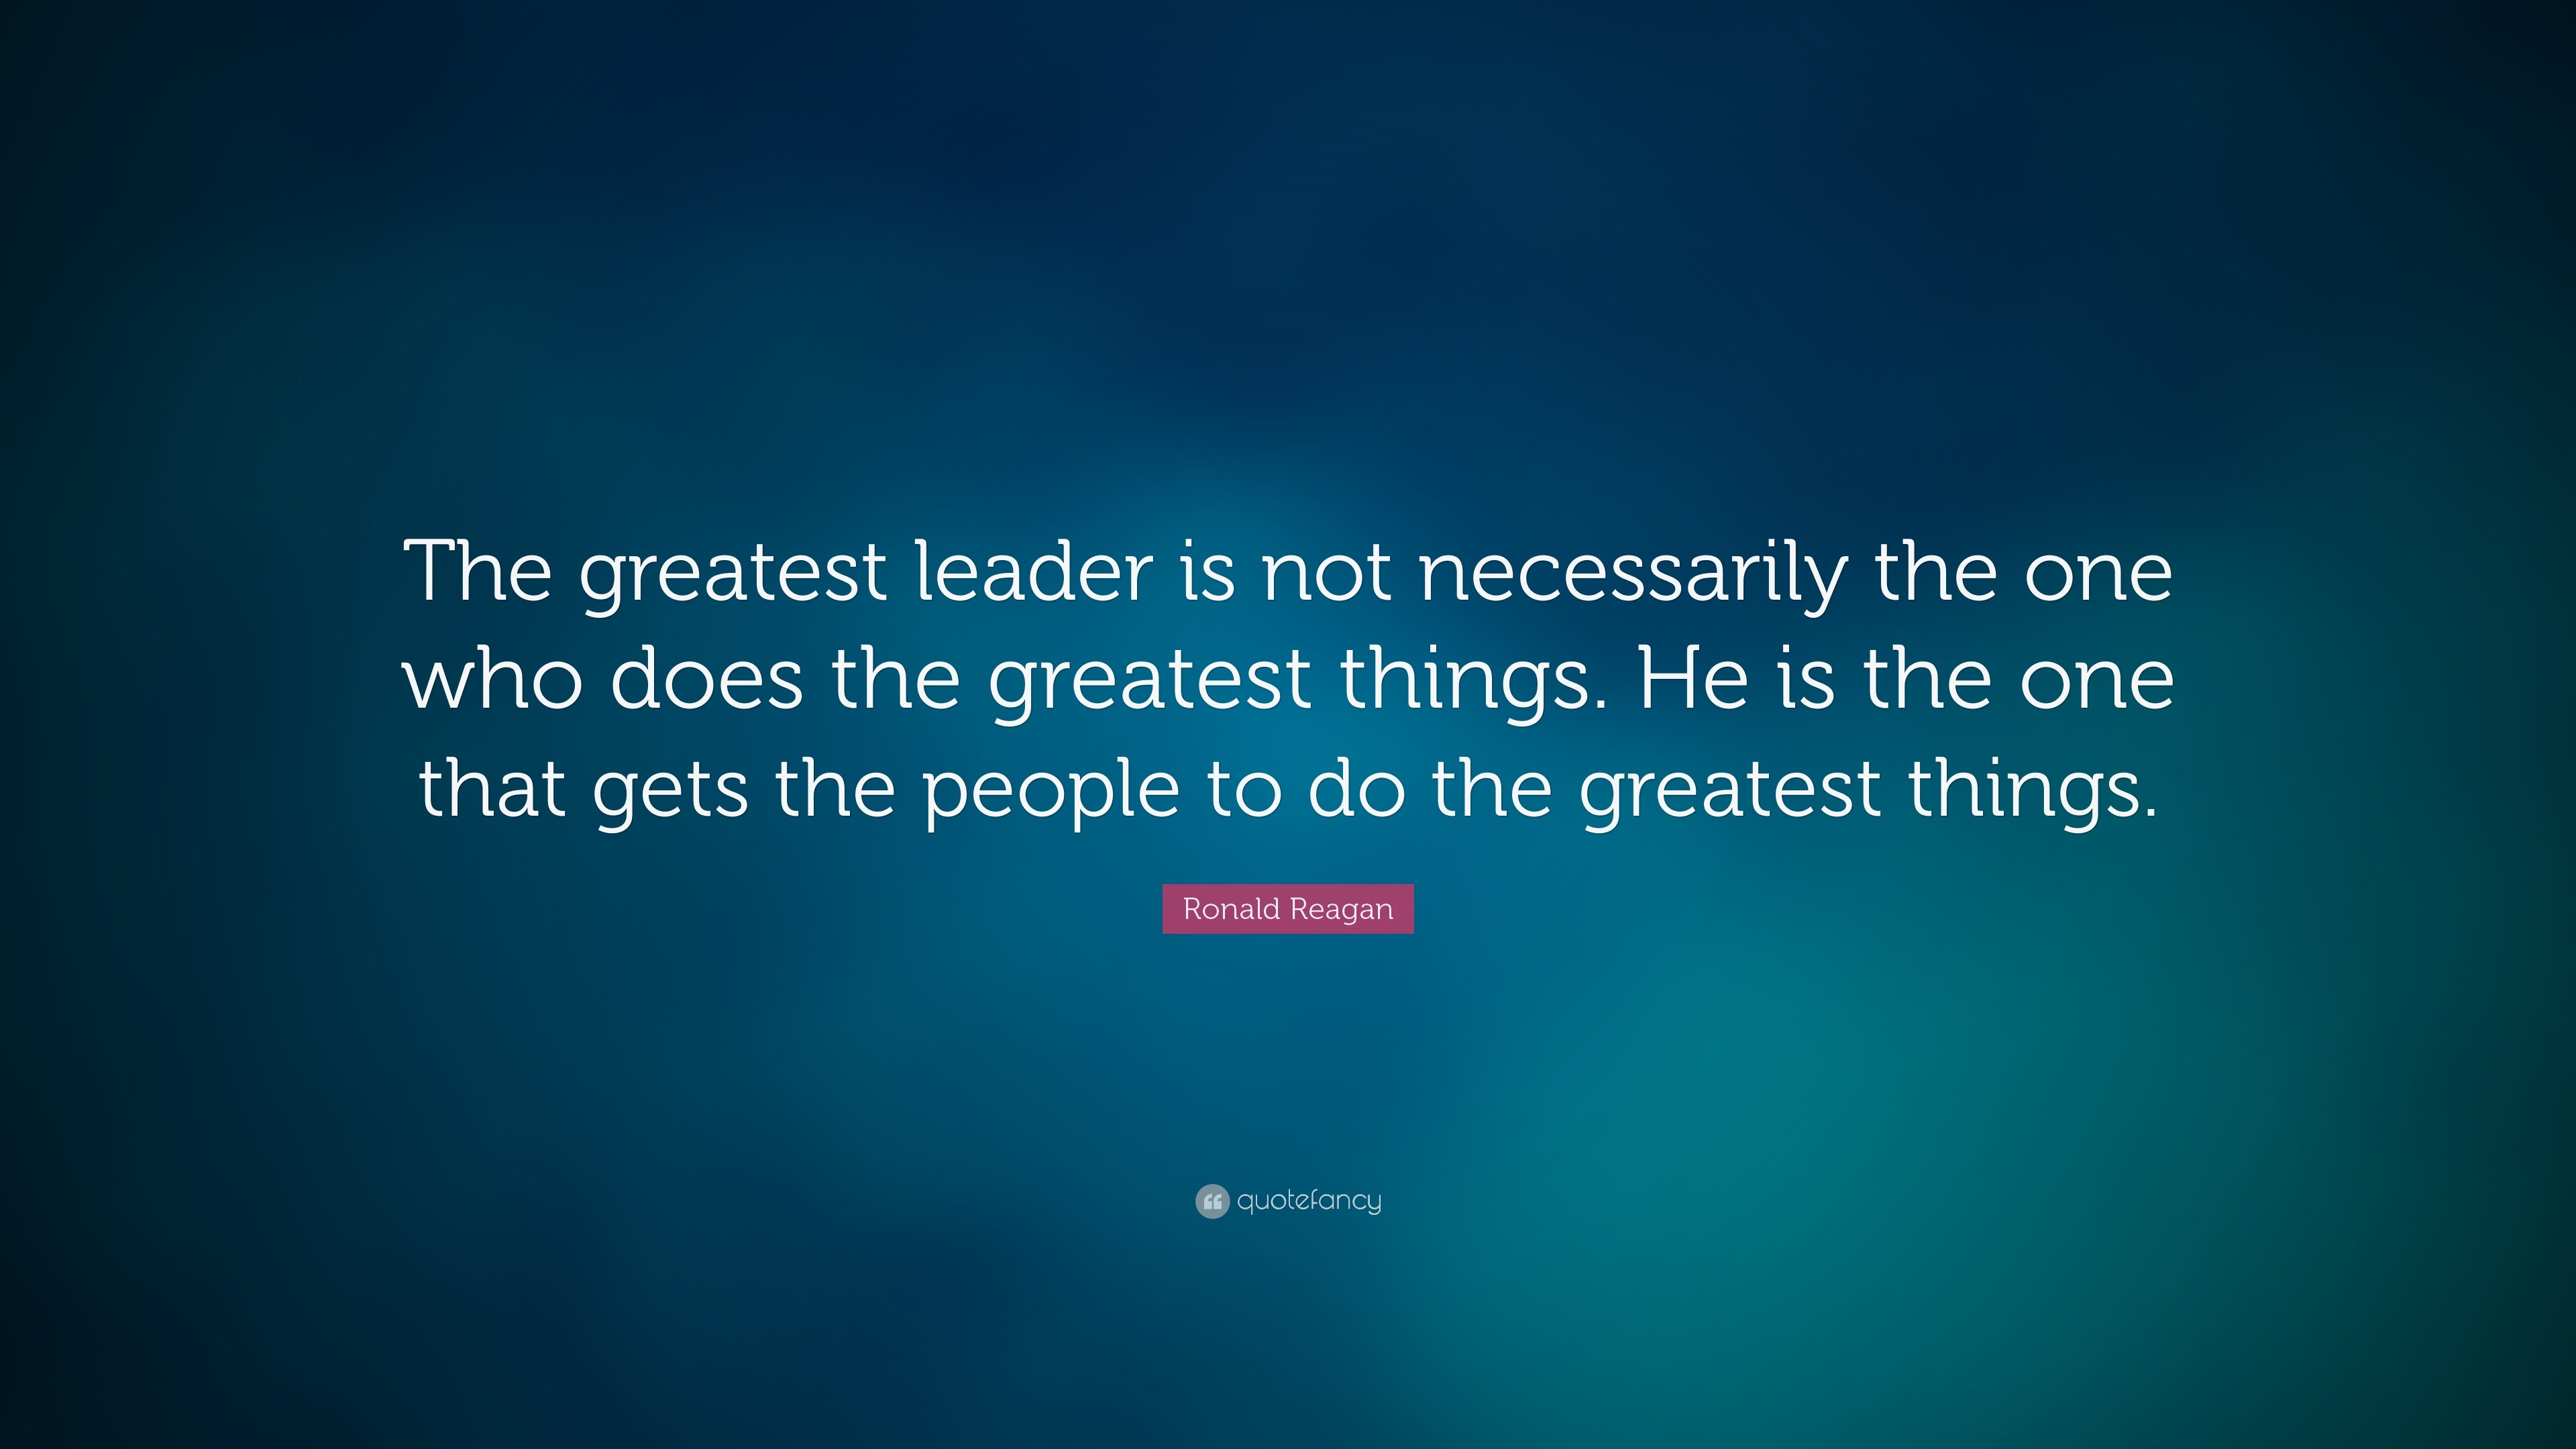 Leadership Quotes (25 wallpapers) - Quotefancy